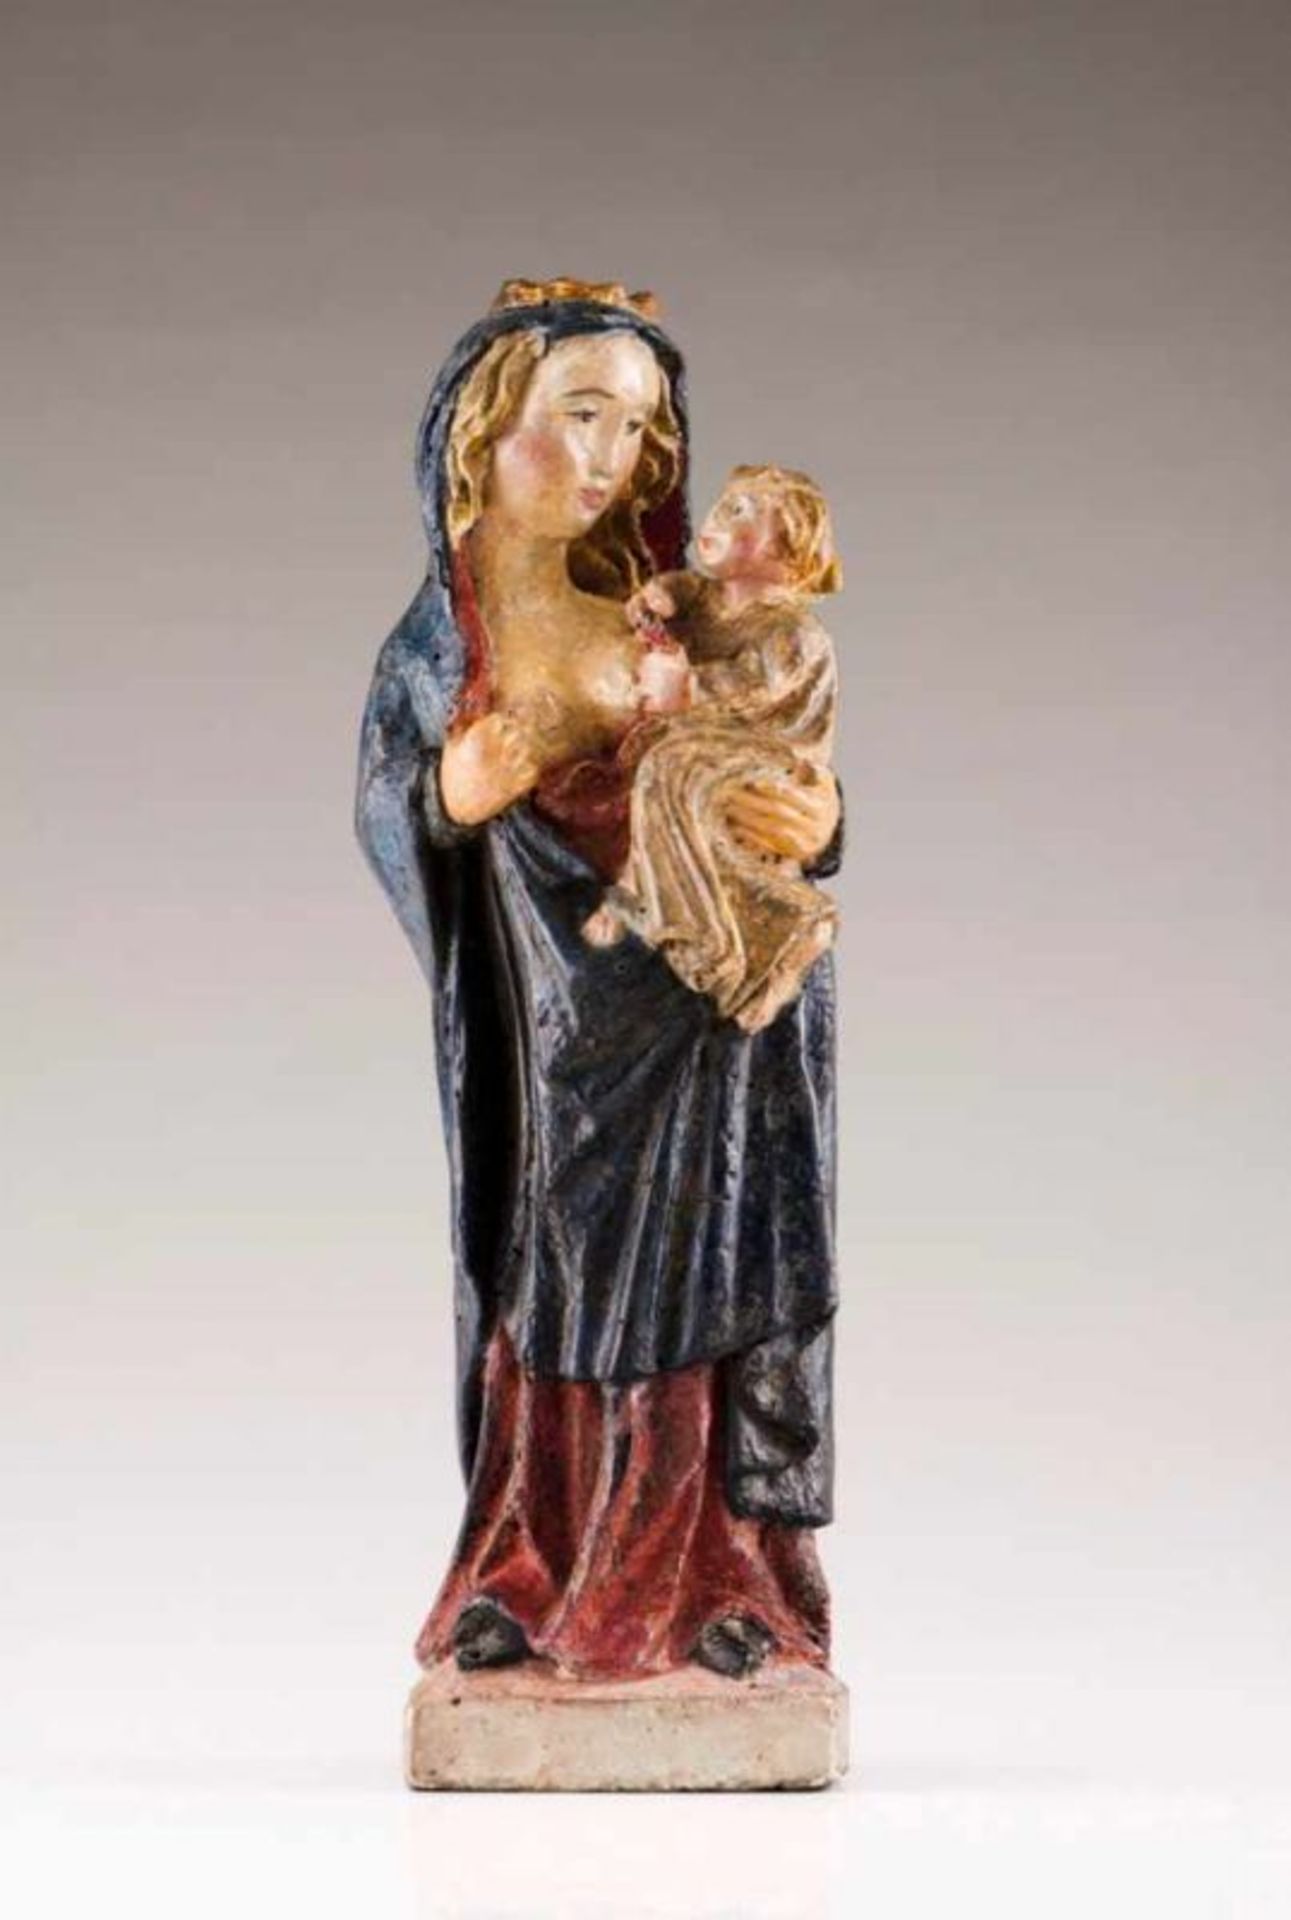 Our Lady of the Milk with the Child Polychrome wood sculpture France, 15th century (some parts